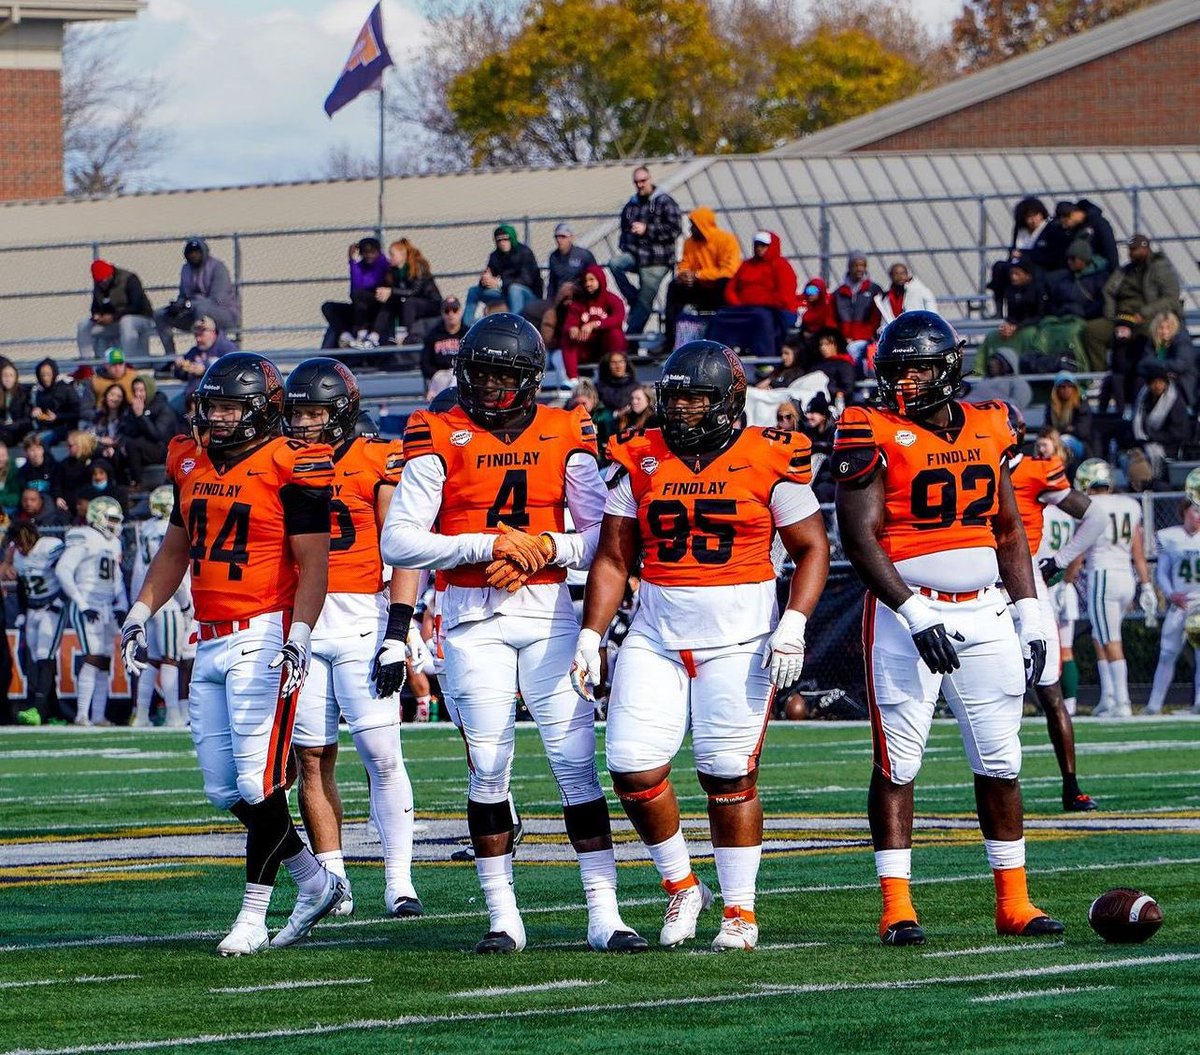 After a great conversation with @CoachCole94 , I am blessed to have received a scholarship offer from Findlay University. @H_Hamid6 #GoOilers #1Team #AGTG 🟧⬛️⬜️